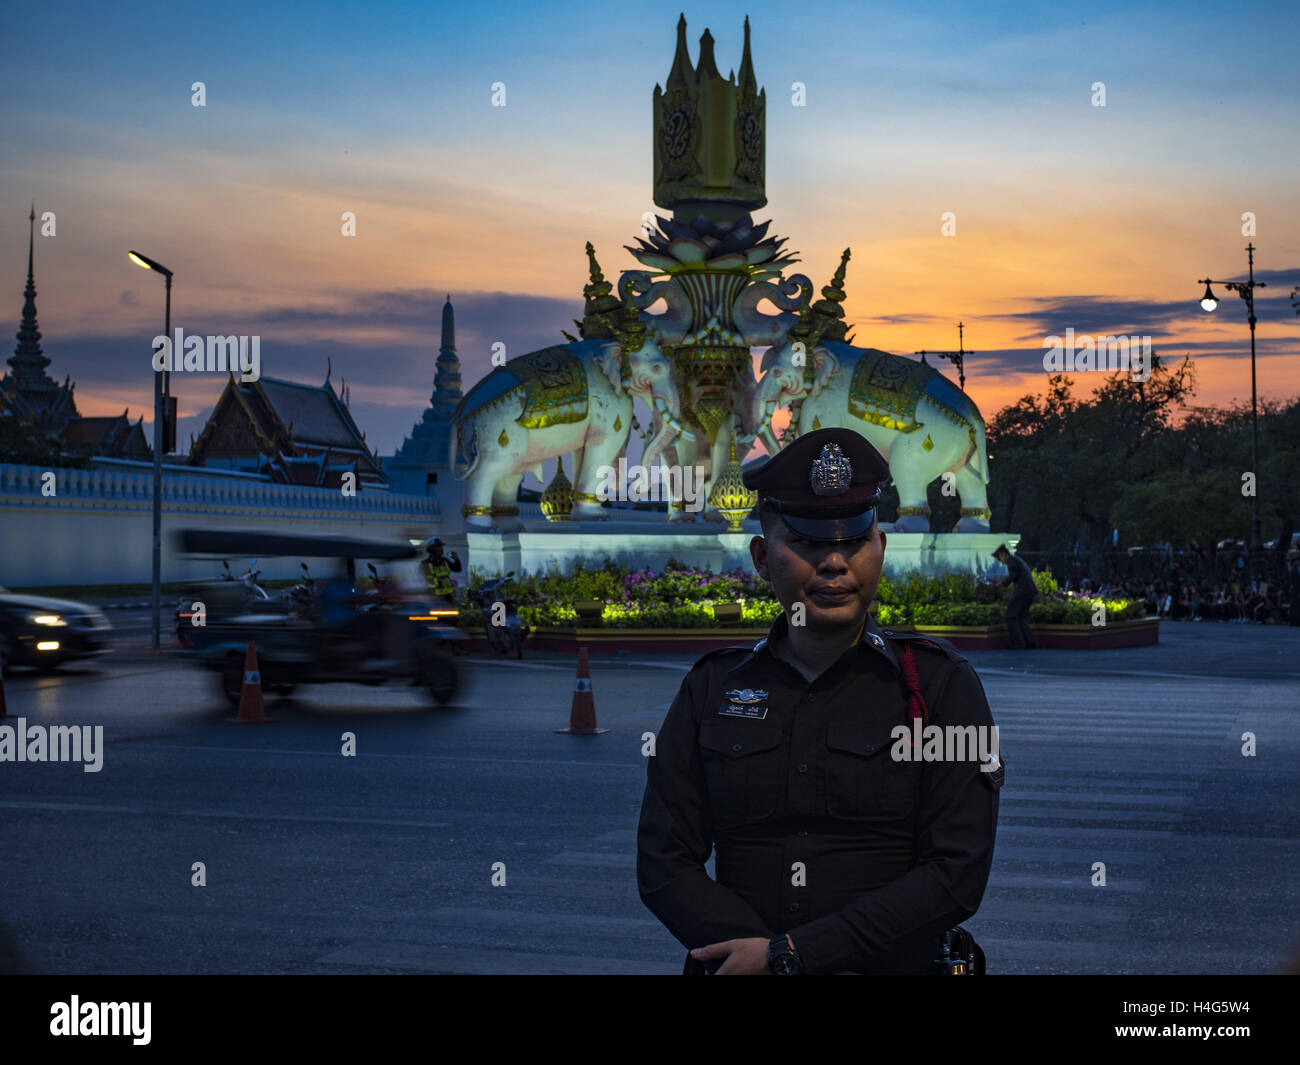 Bangkok, Bangkok, Thailand. 15th Oct, 2016. A Thai police officer guards an intersection in front of the Grand Palace in Bangkok during mourning rituals for the late Bhumibol Adulyadej, the King of Thailand. King Bhumibol Adulyadej died Oct. 13, 2016. He was 88. His death comes after a period of failing health. With the king's death, the world's longest-reigning monarch is Queen Elizabeth II, who ascended to the British throne in 1952. Bhumibol Adulyadej, was born in Cambridge, MA, on 5 December 1927. He was the ninth monarch of Thailand from the Chakri Dynasty and is known as Rama IX. He Stock Photo